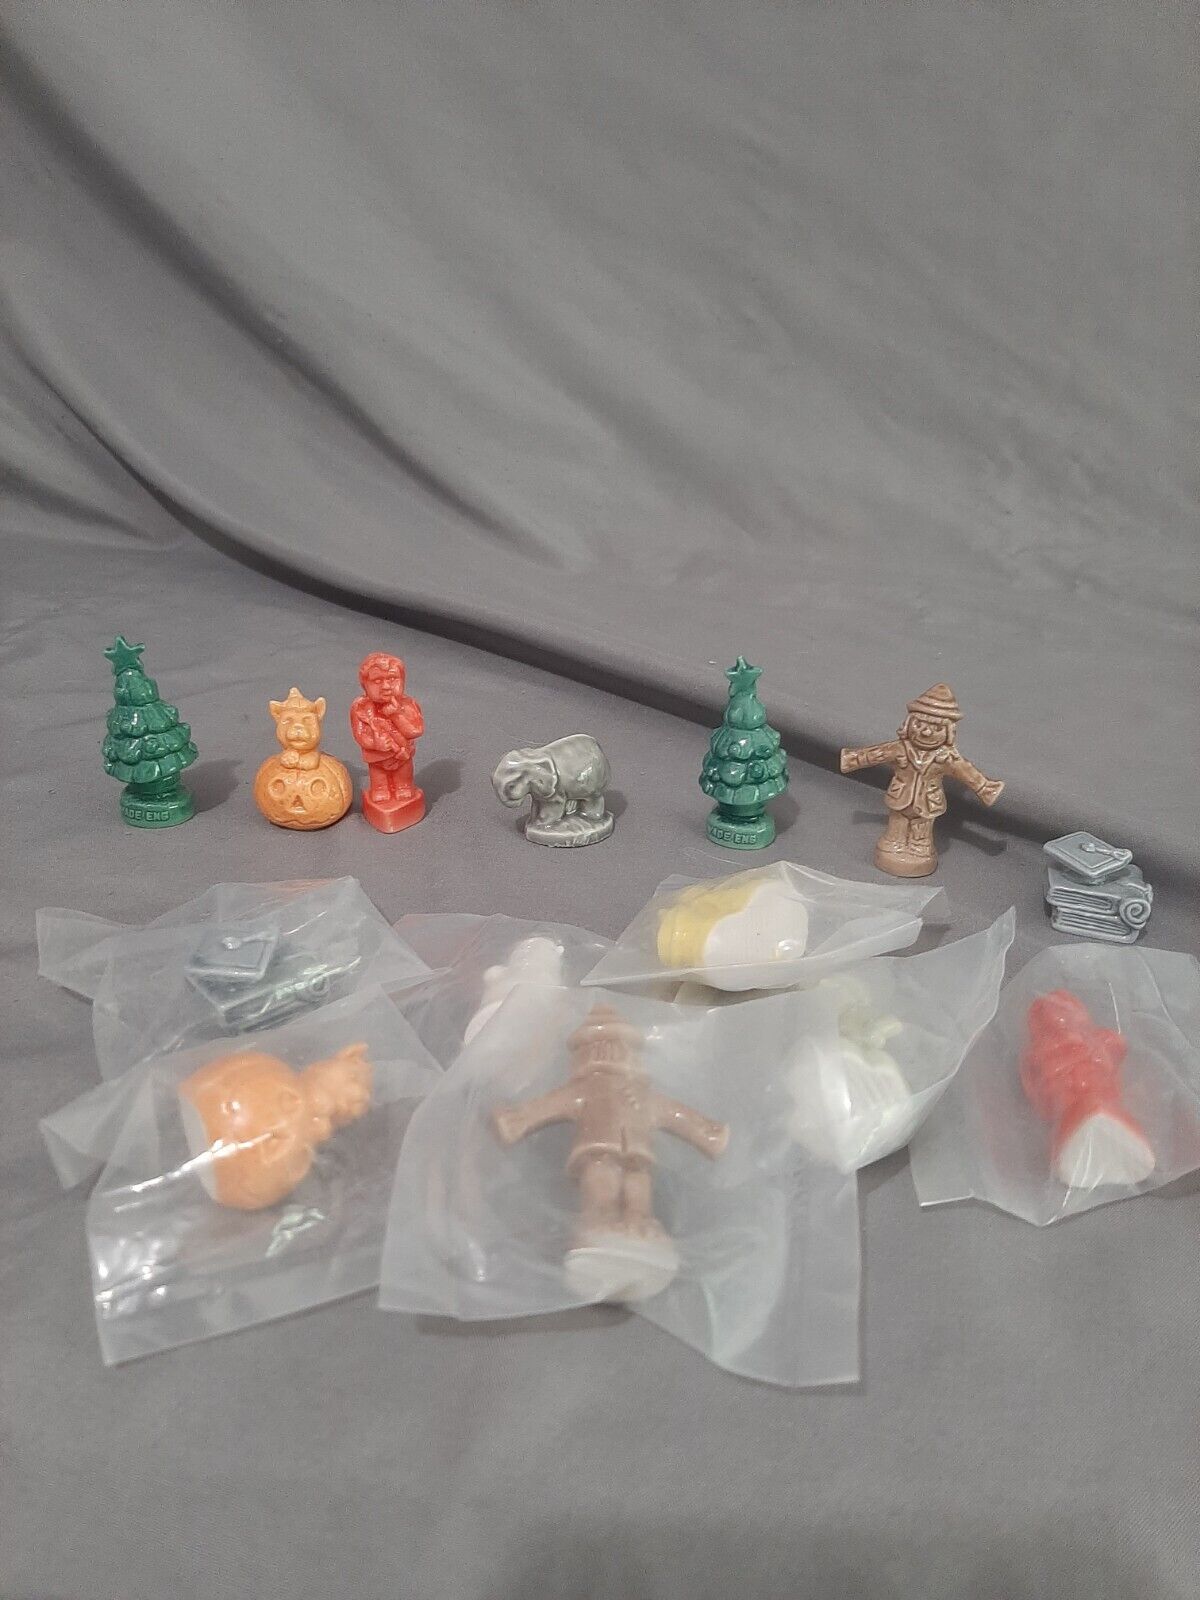 Lot of 14 Vintage Wade England Whimsies Miniature Figurines, Preowned